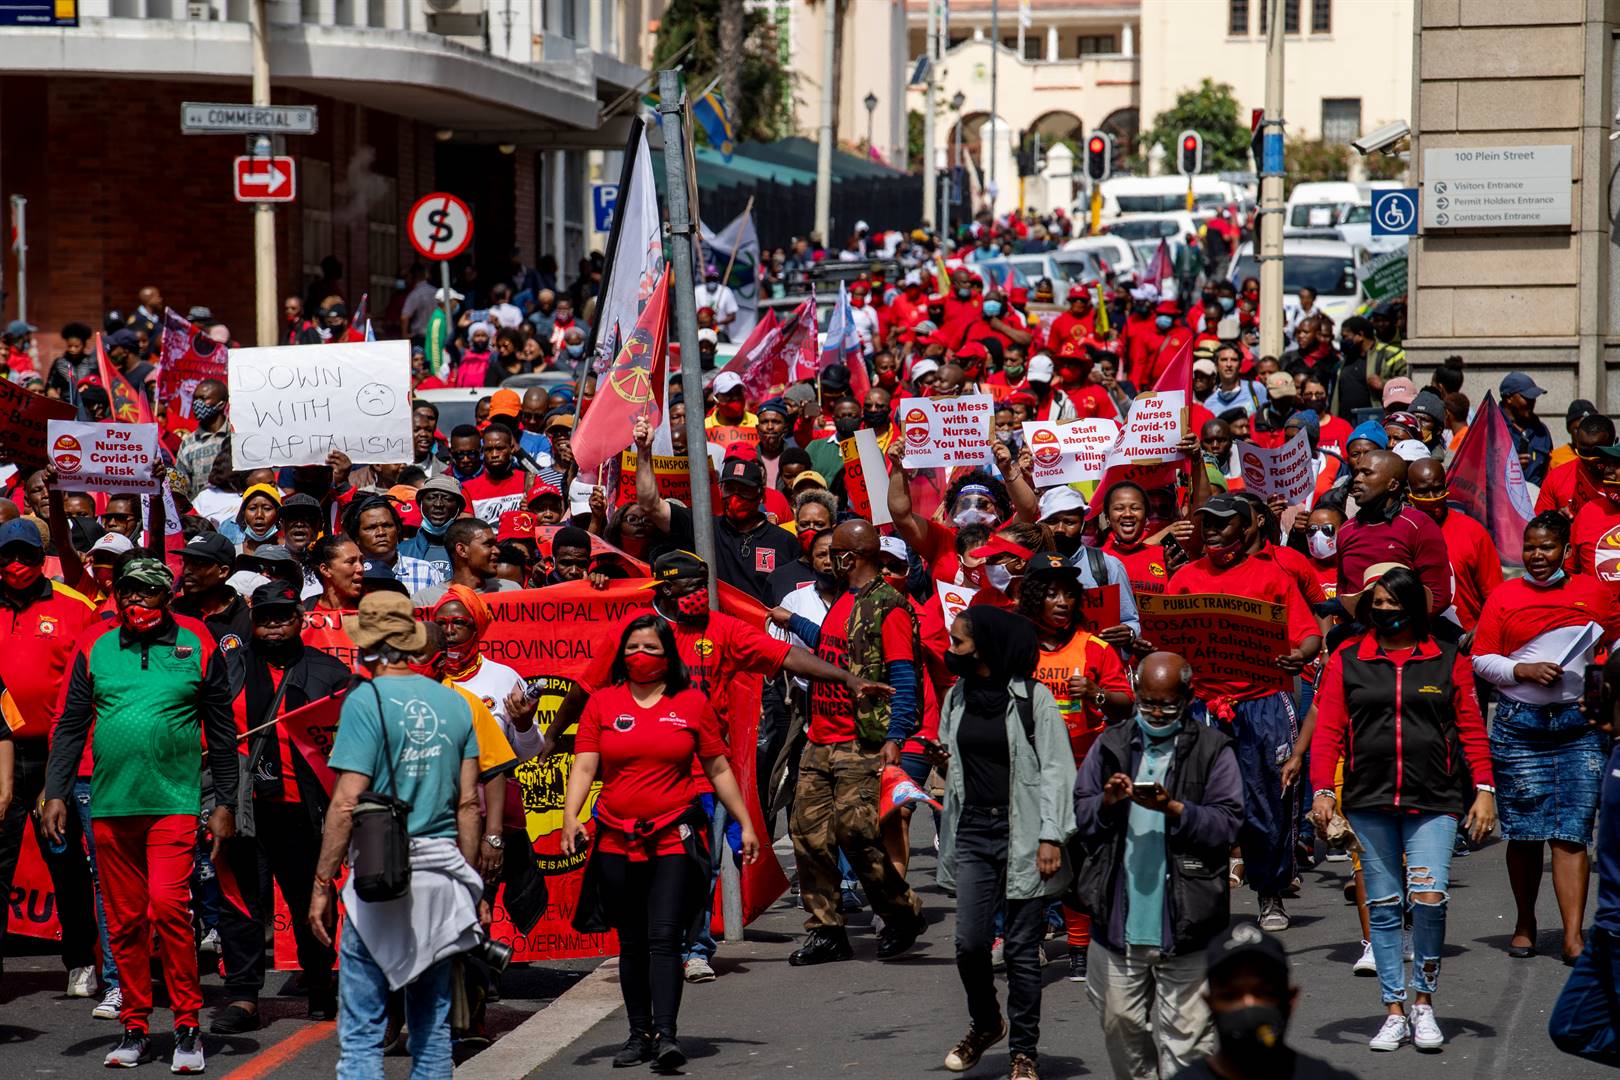 NEHAWU says collective bargaining is under attack in SA. Photo: Jaco Marais